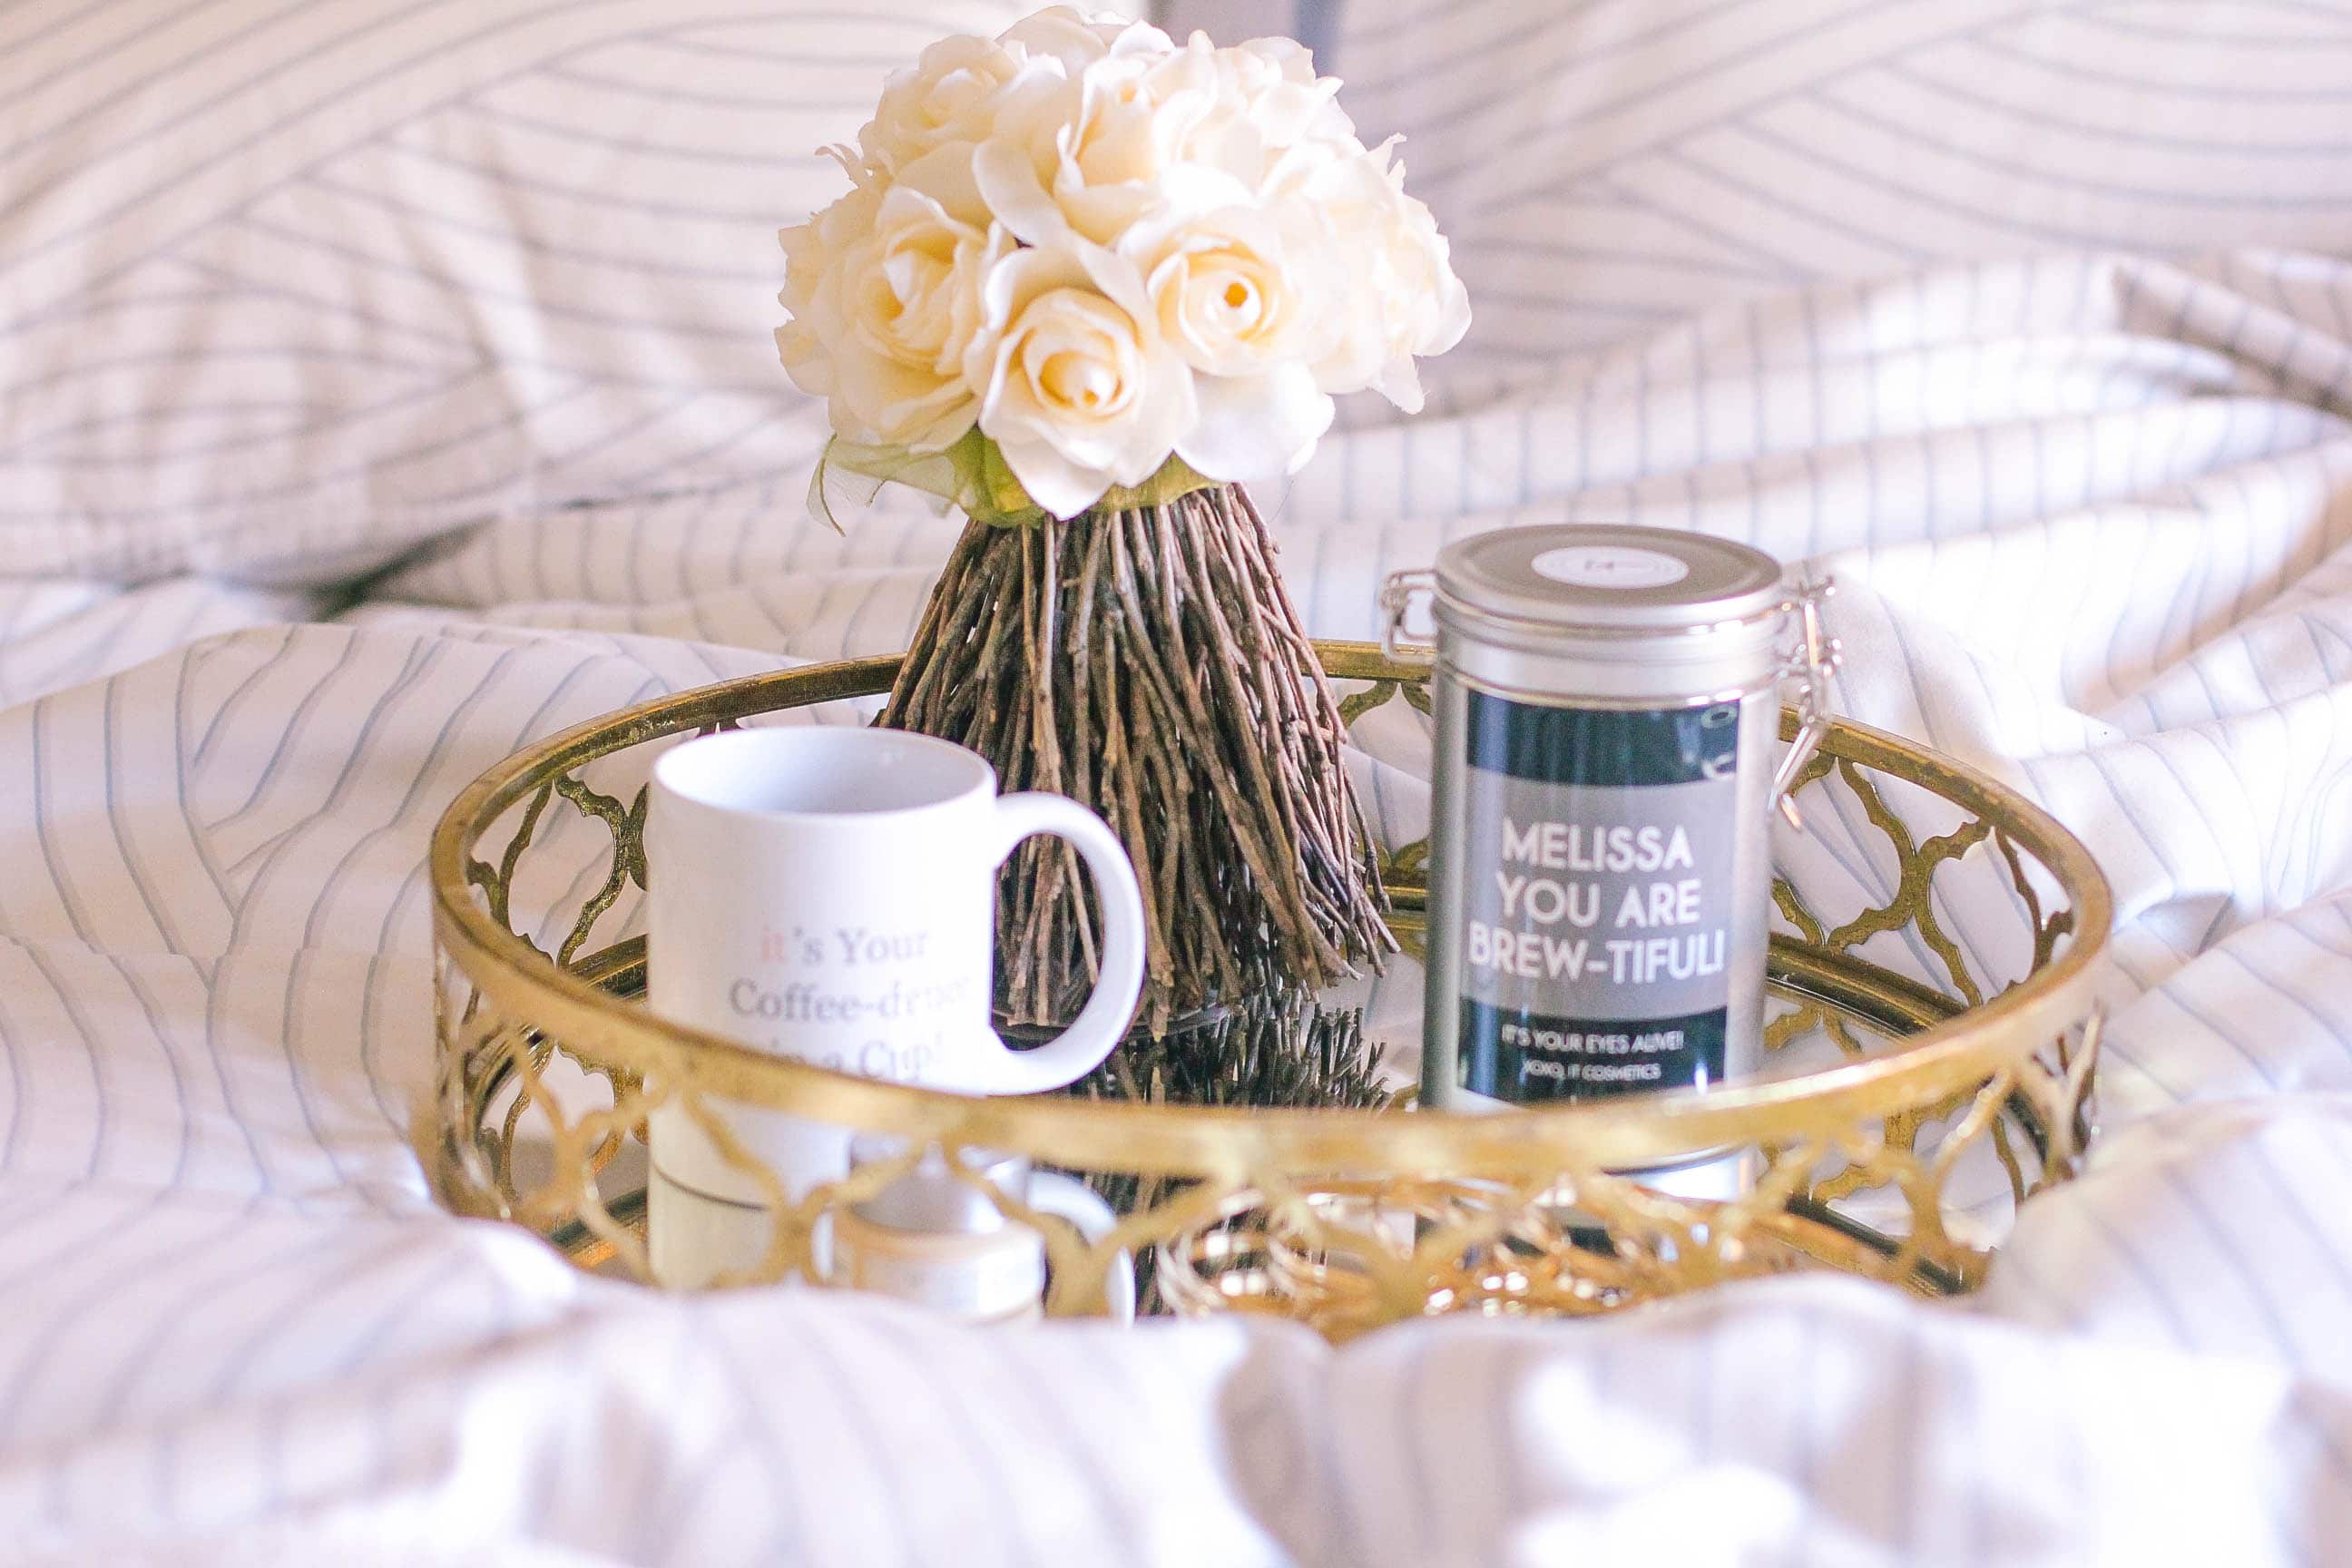 missyonmadison, it cosmetics, coffee, morning coffee, rainy day in, breakfast in bed, rainy day in bed, coffee mug, gold butler tray, melissa tierney, missyonmadison instagram, la blogger, bloglovin, 